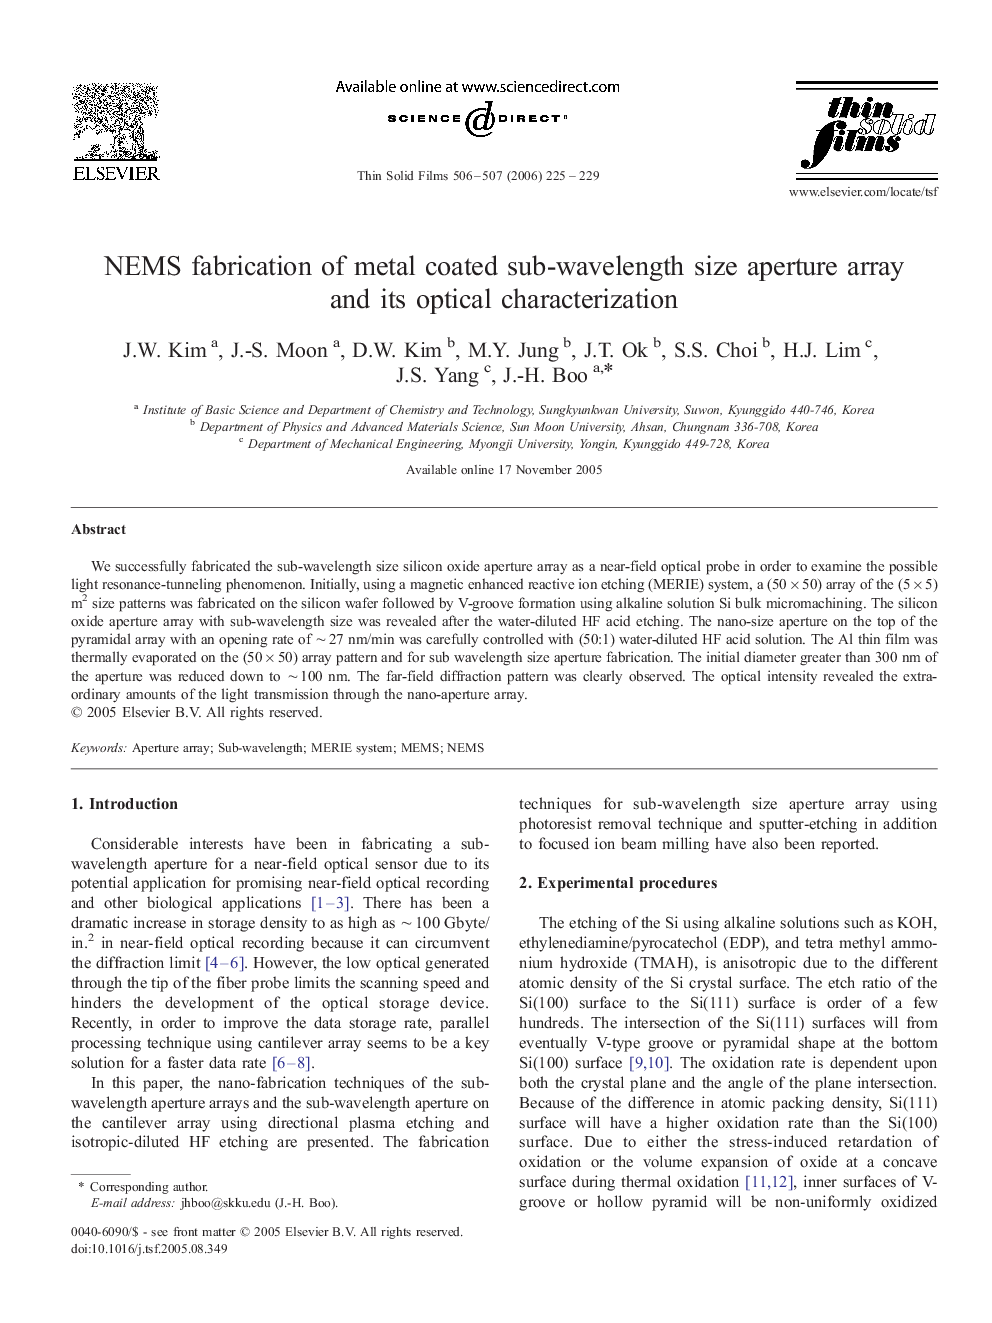 NEMS fabrication of metal coated sub-wavelength size aperture array and its optical characterization